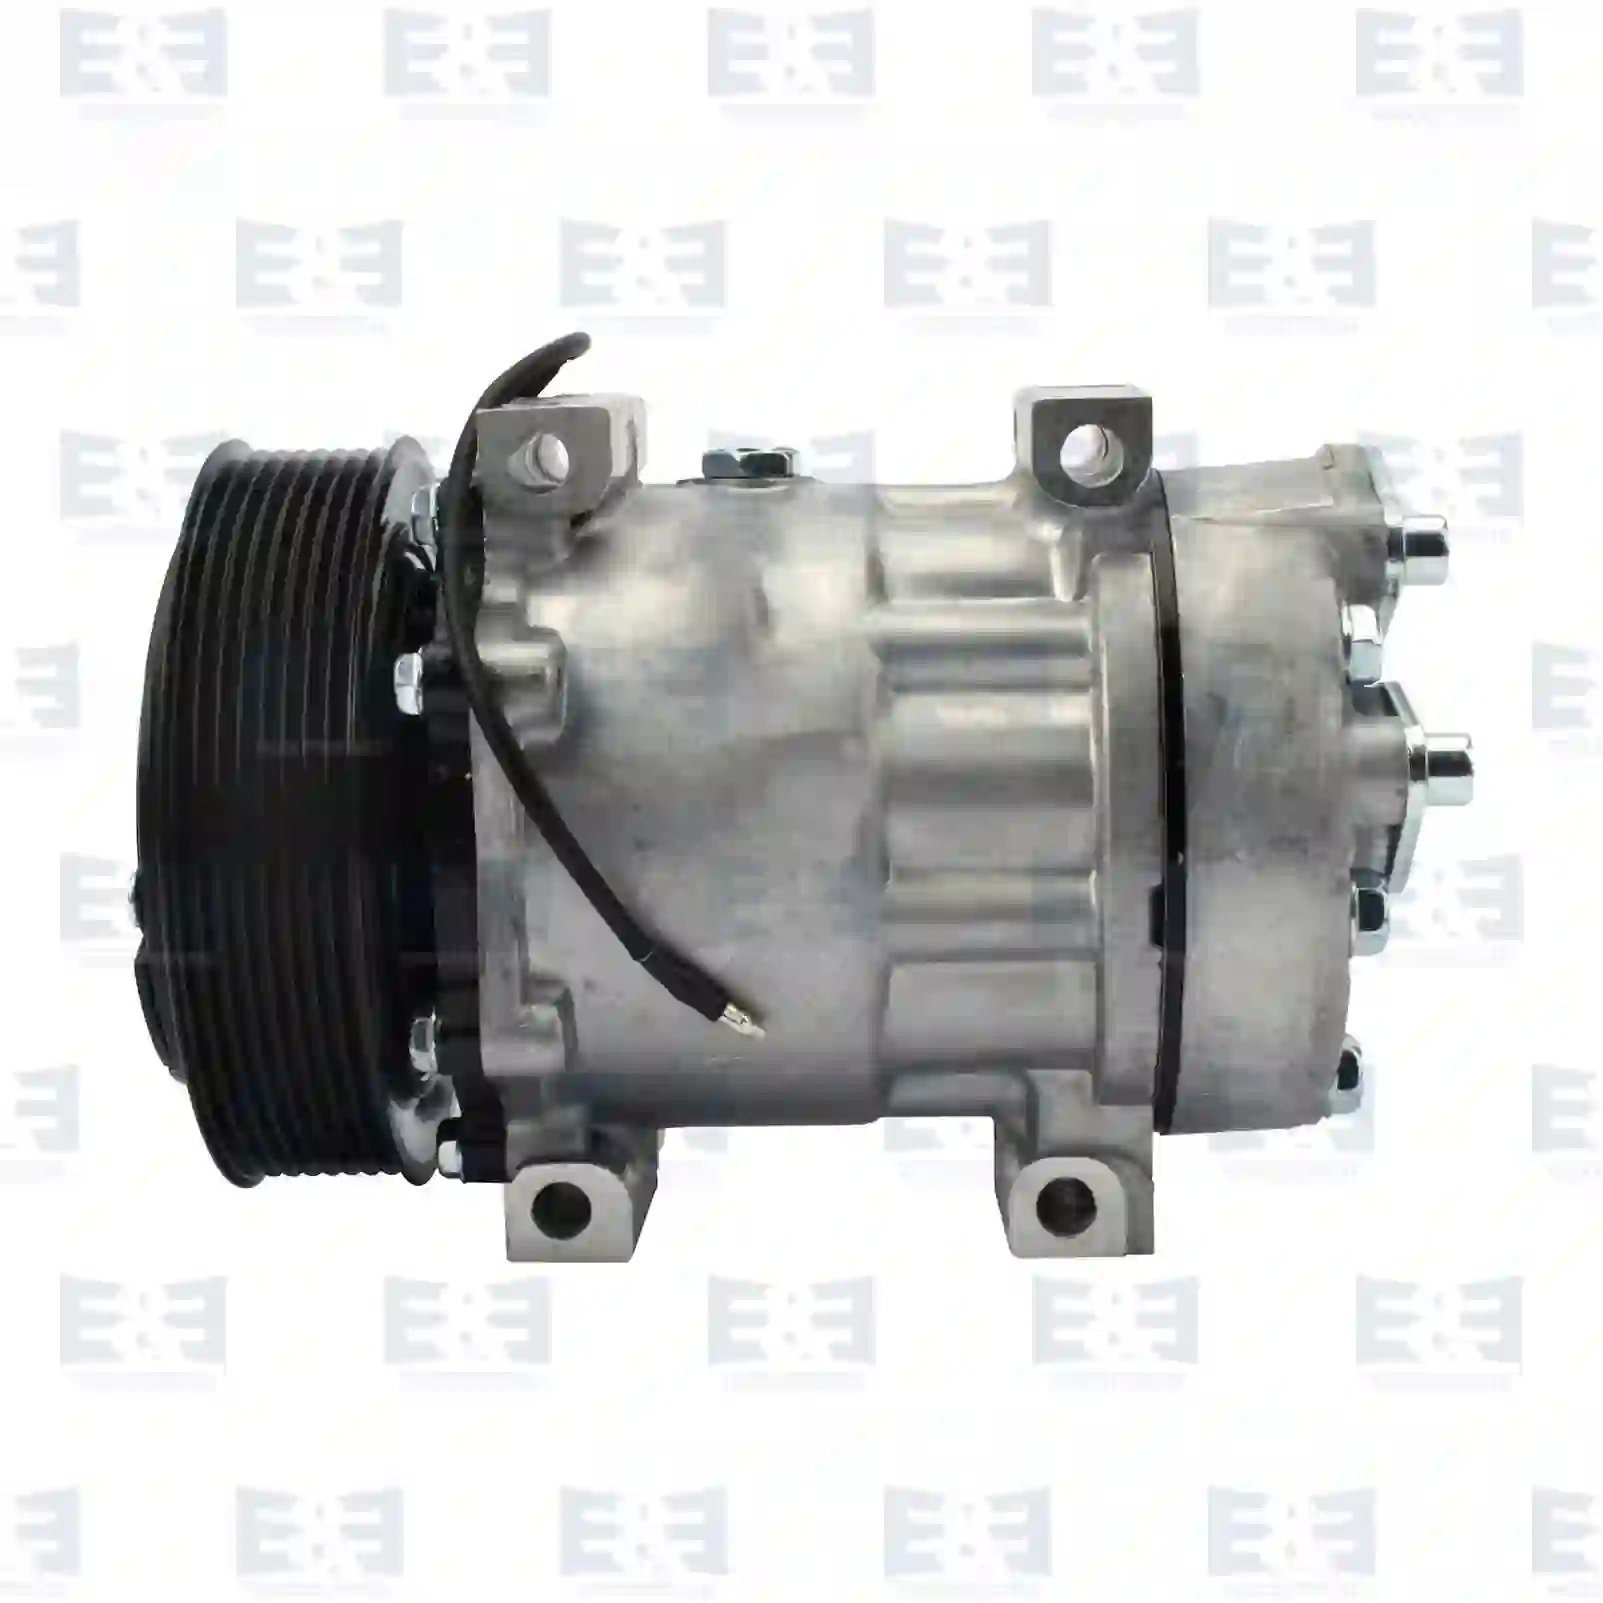 Compressor, Air Conditioning Compressor, air conditioning, oil filled, EE No 2E2276610 ,  oem no:7420538307, 11104251, 11412631, 1376998, 20538307, 21184142, 8113628, 8119628, 8191892, 850003041, 85000315, 85003041, ZG60394-0008 E&E Truck Spare Parts | Truck Spare Parts, Auotomotive Spare Parts